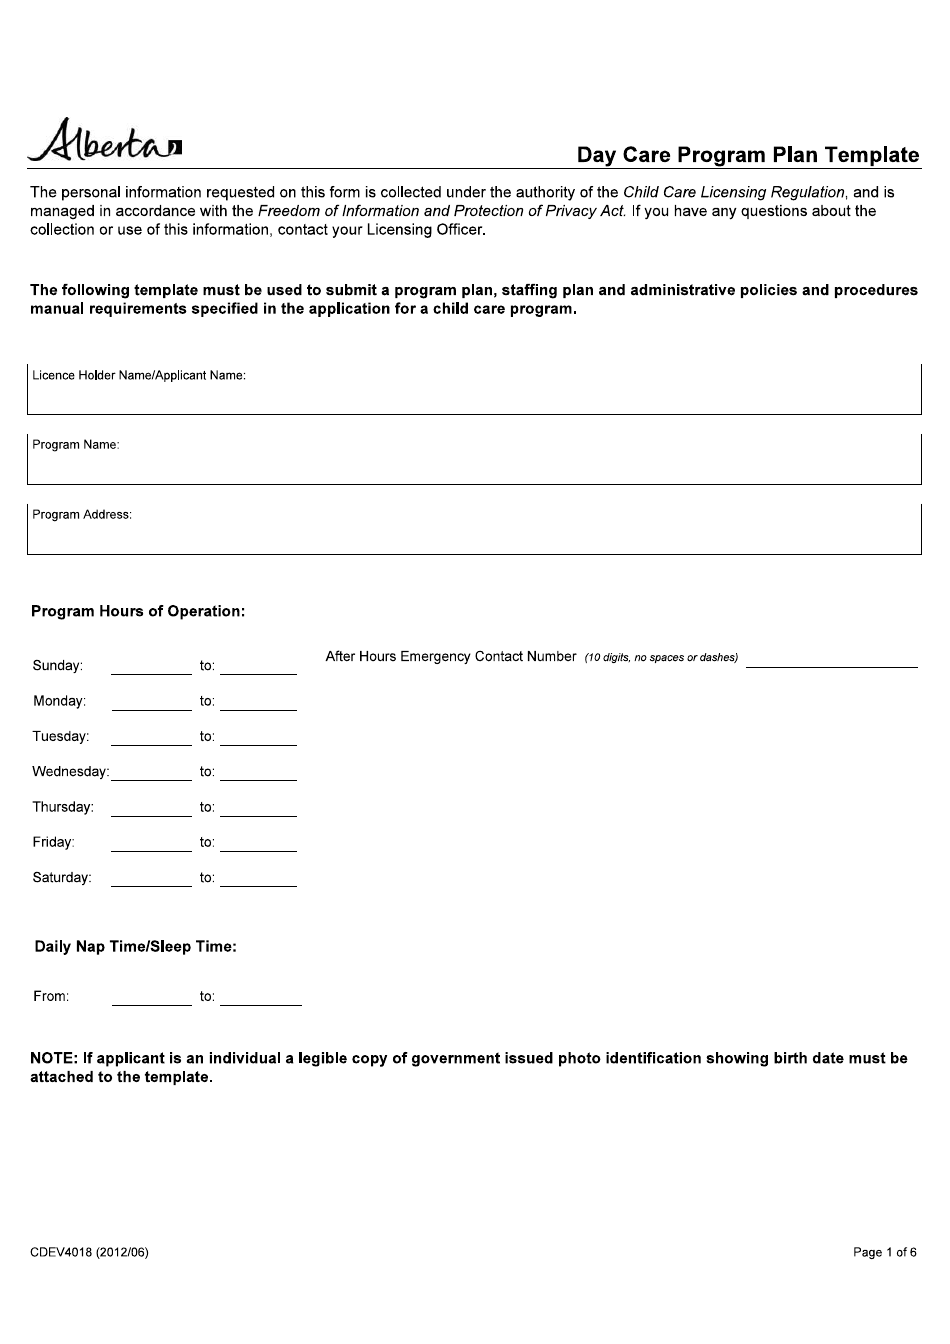 Form CDEV4018 Day Care Program Plan Template - Alberta, Canada, Page 1